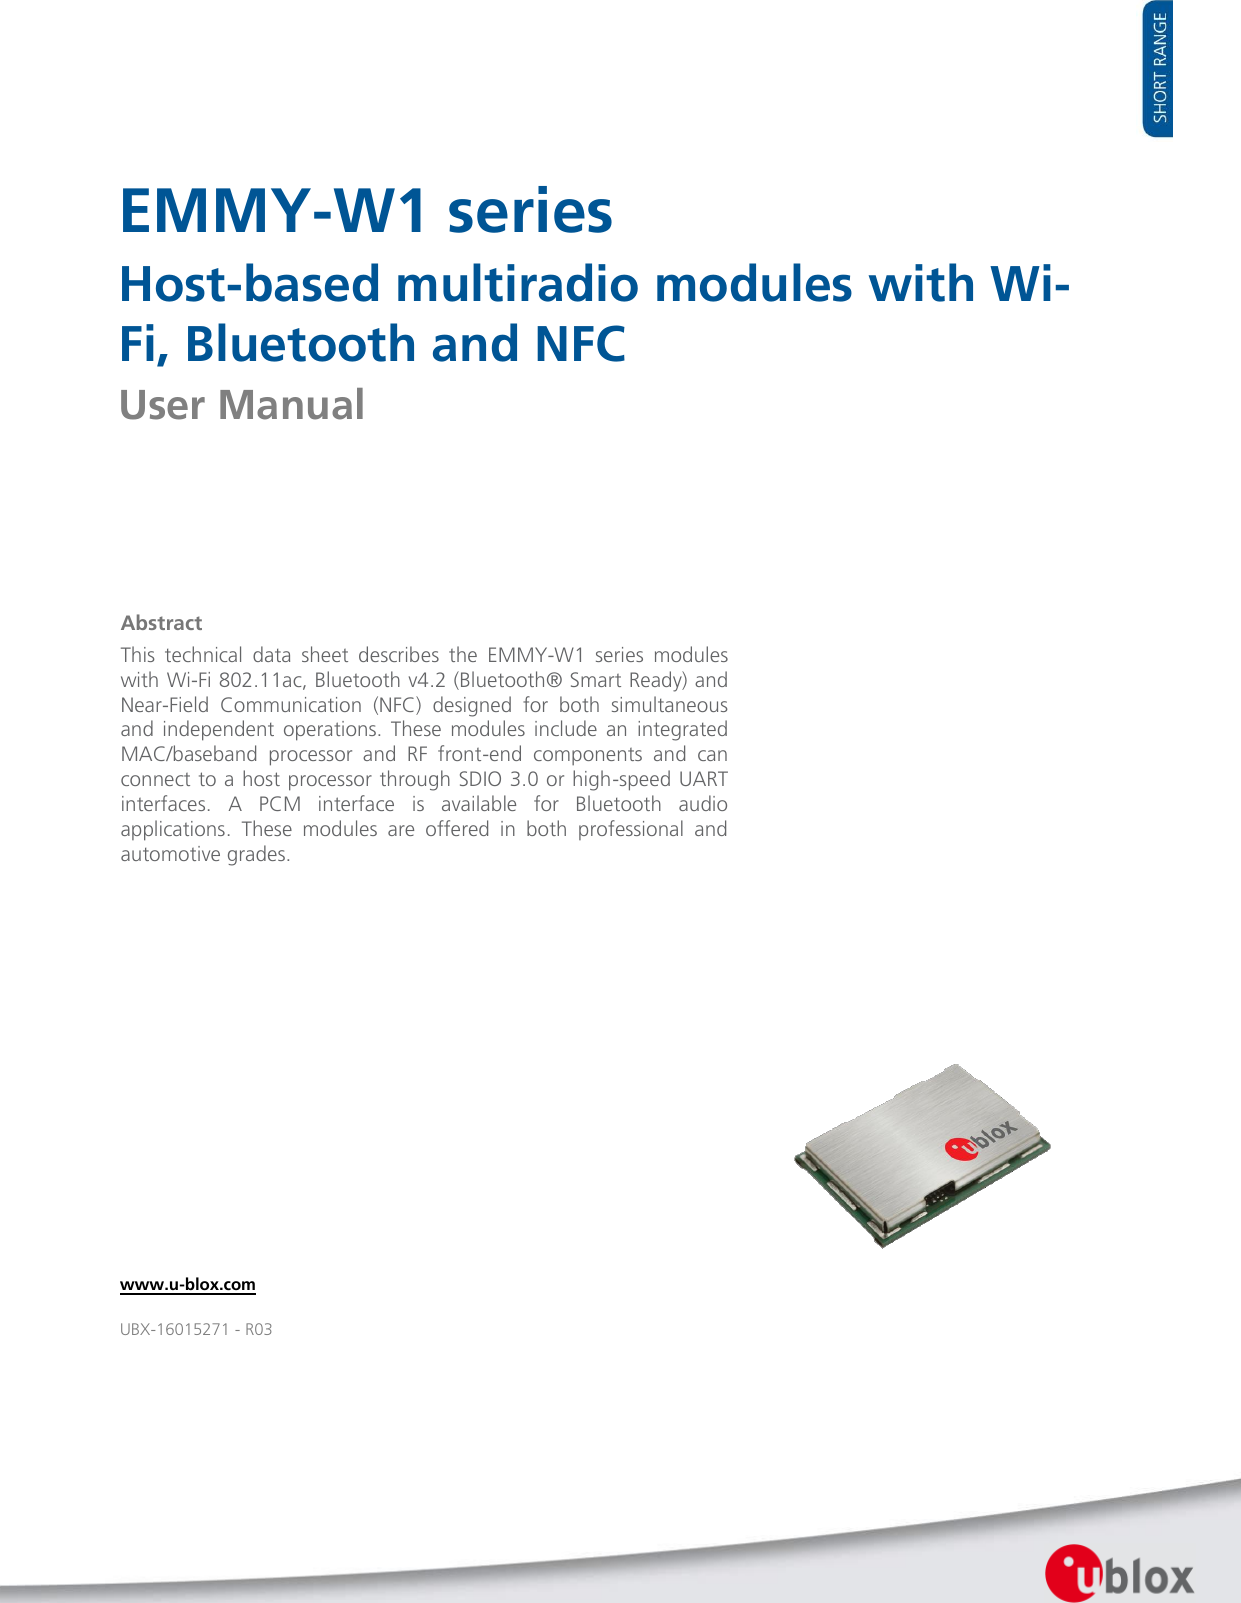   EMMY-W1 series Host-based multiradio modules with Wi-Fi, Bluetooth and NFC User Manual                   Abstract This  technical  data  sheet  describes  the  EMMY-W1  series  modules with Wi-Fi 802.11ac, Bluetooth v4.2 (Bluetooth® Smart Ready) and Near-Field  Communication  (NFC)  designed  for  both  simultaneous and  independent  operations.  These  modules  include  an  integrated MAC/baseband  processor  and  RF  front-end  components  and  can connect to a host processor through SDIO 3.0 or high-speed UART interfaces.  A  PCM  interface  is  available  for  Bluetooth  audio applications.  These  modules  are  offered  in  both  professional  and automotive grades.  www.u-blox.com UBX-16015271 - R03 